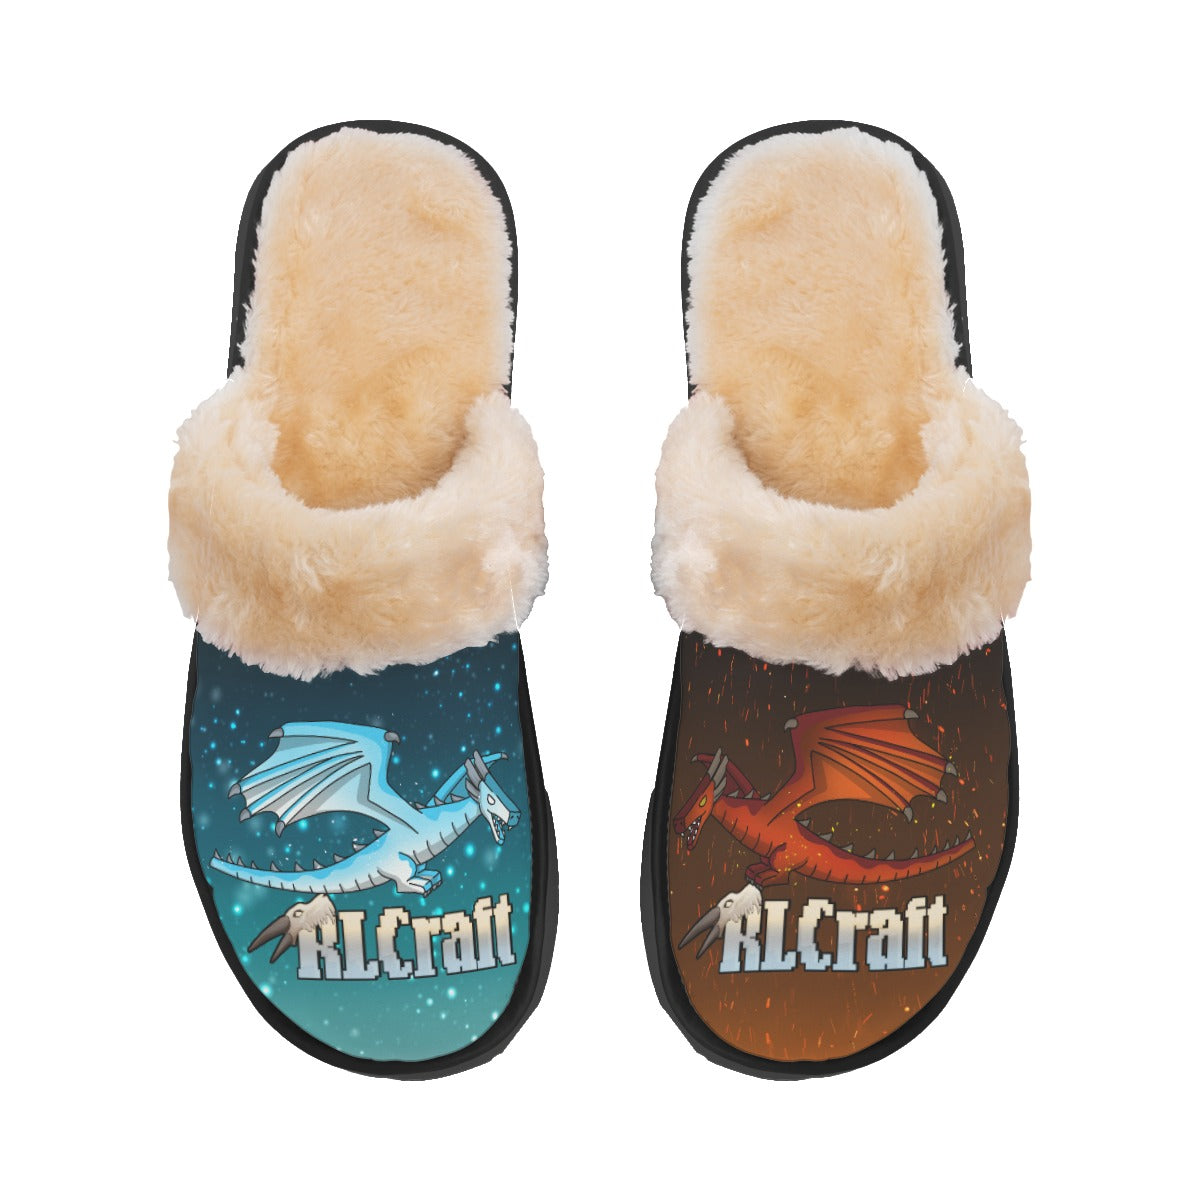 Men's Shivaxi RLCraft Slippers